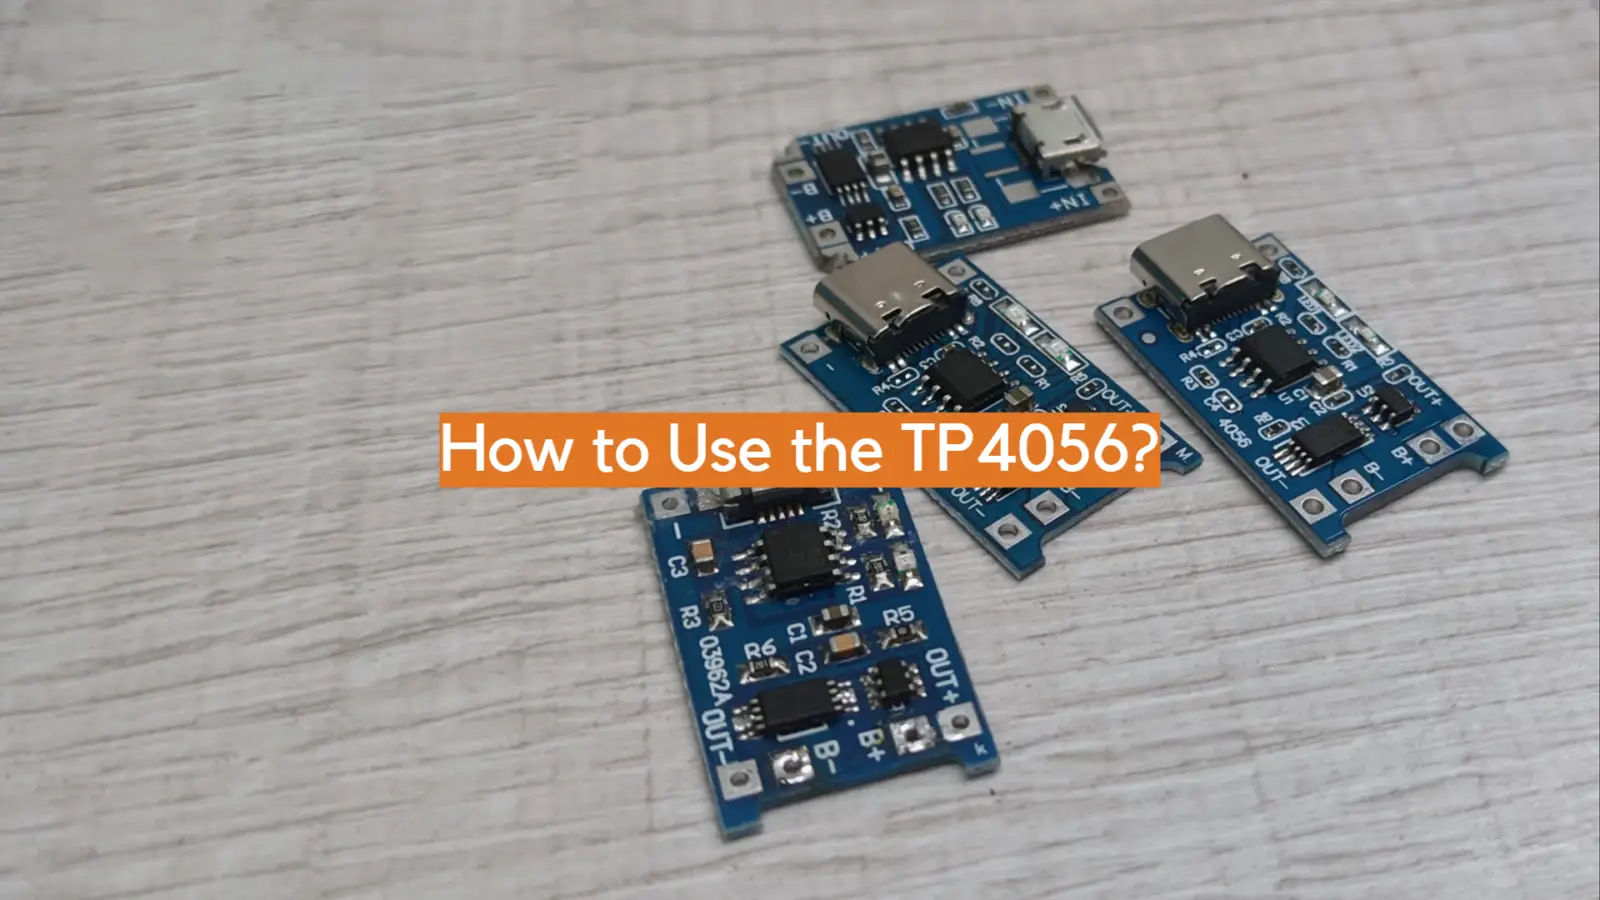 How to Use the TP4056?